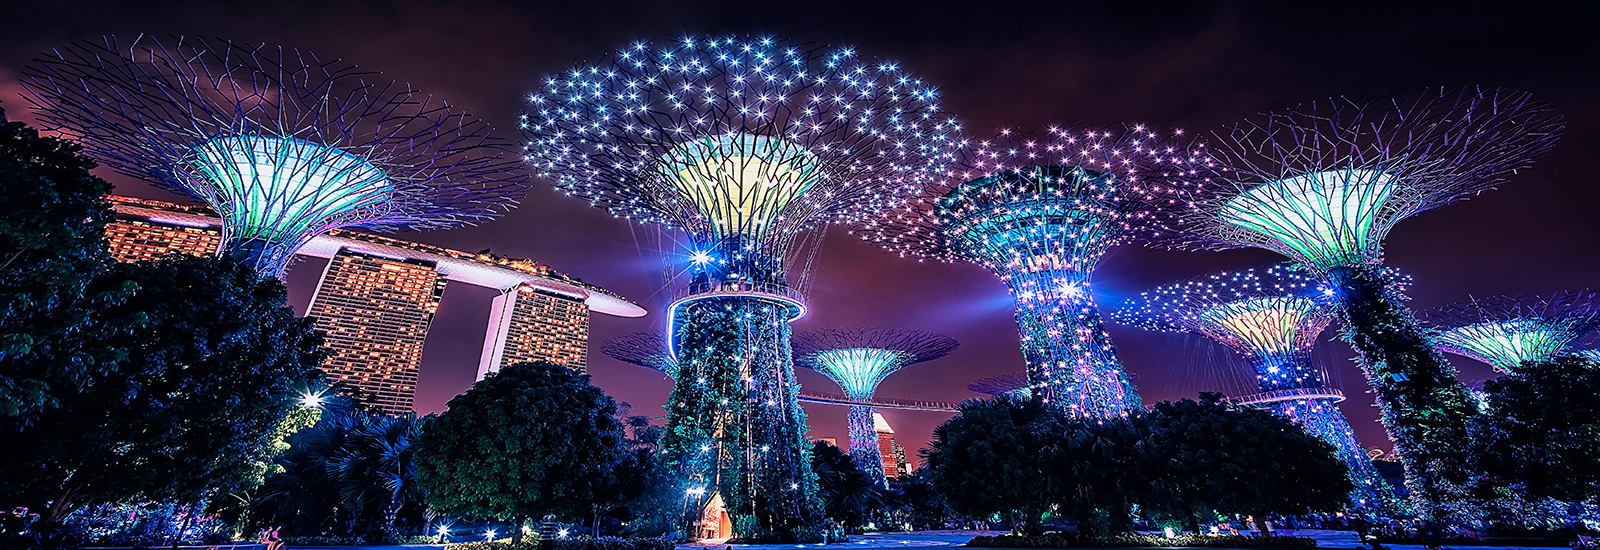 A stock photo of Gardens By The Bay in Singapore, Singapore.